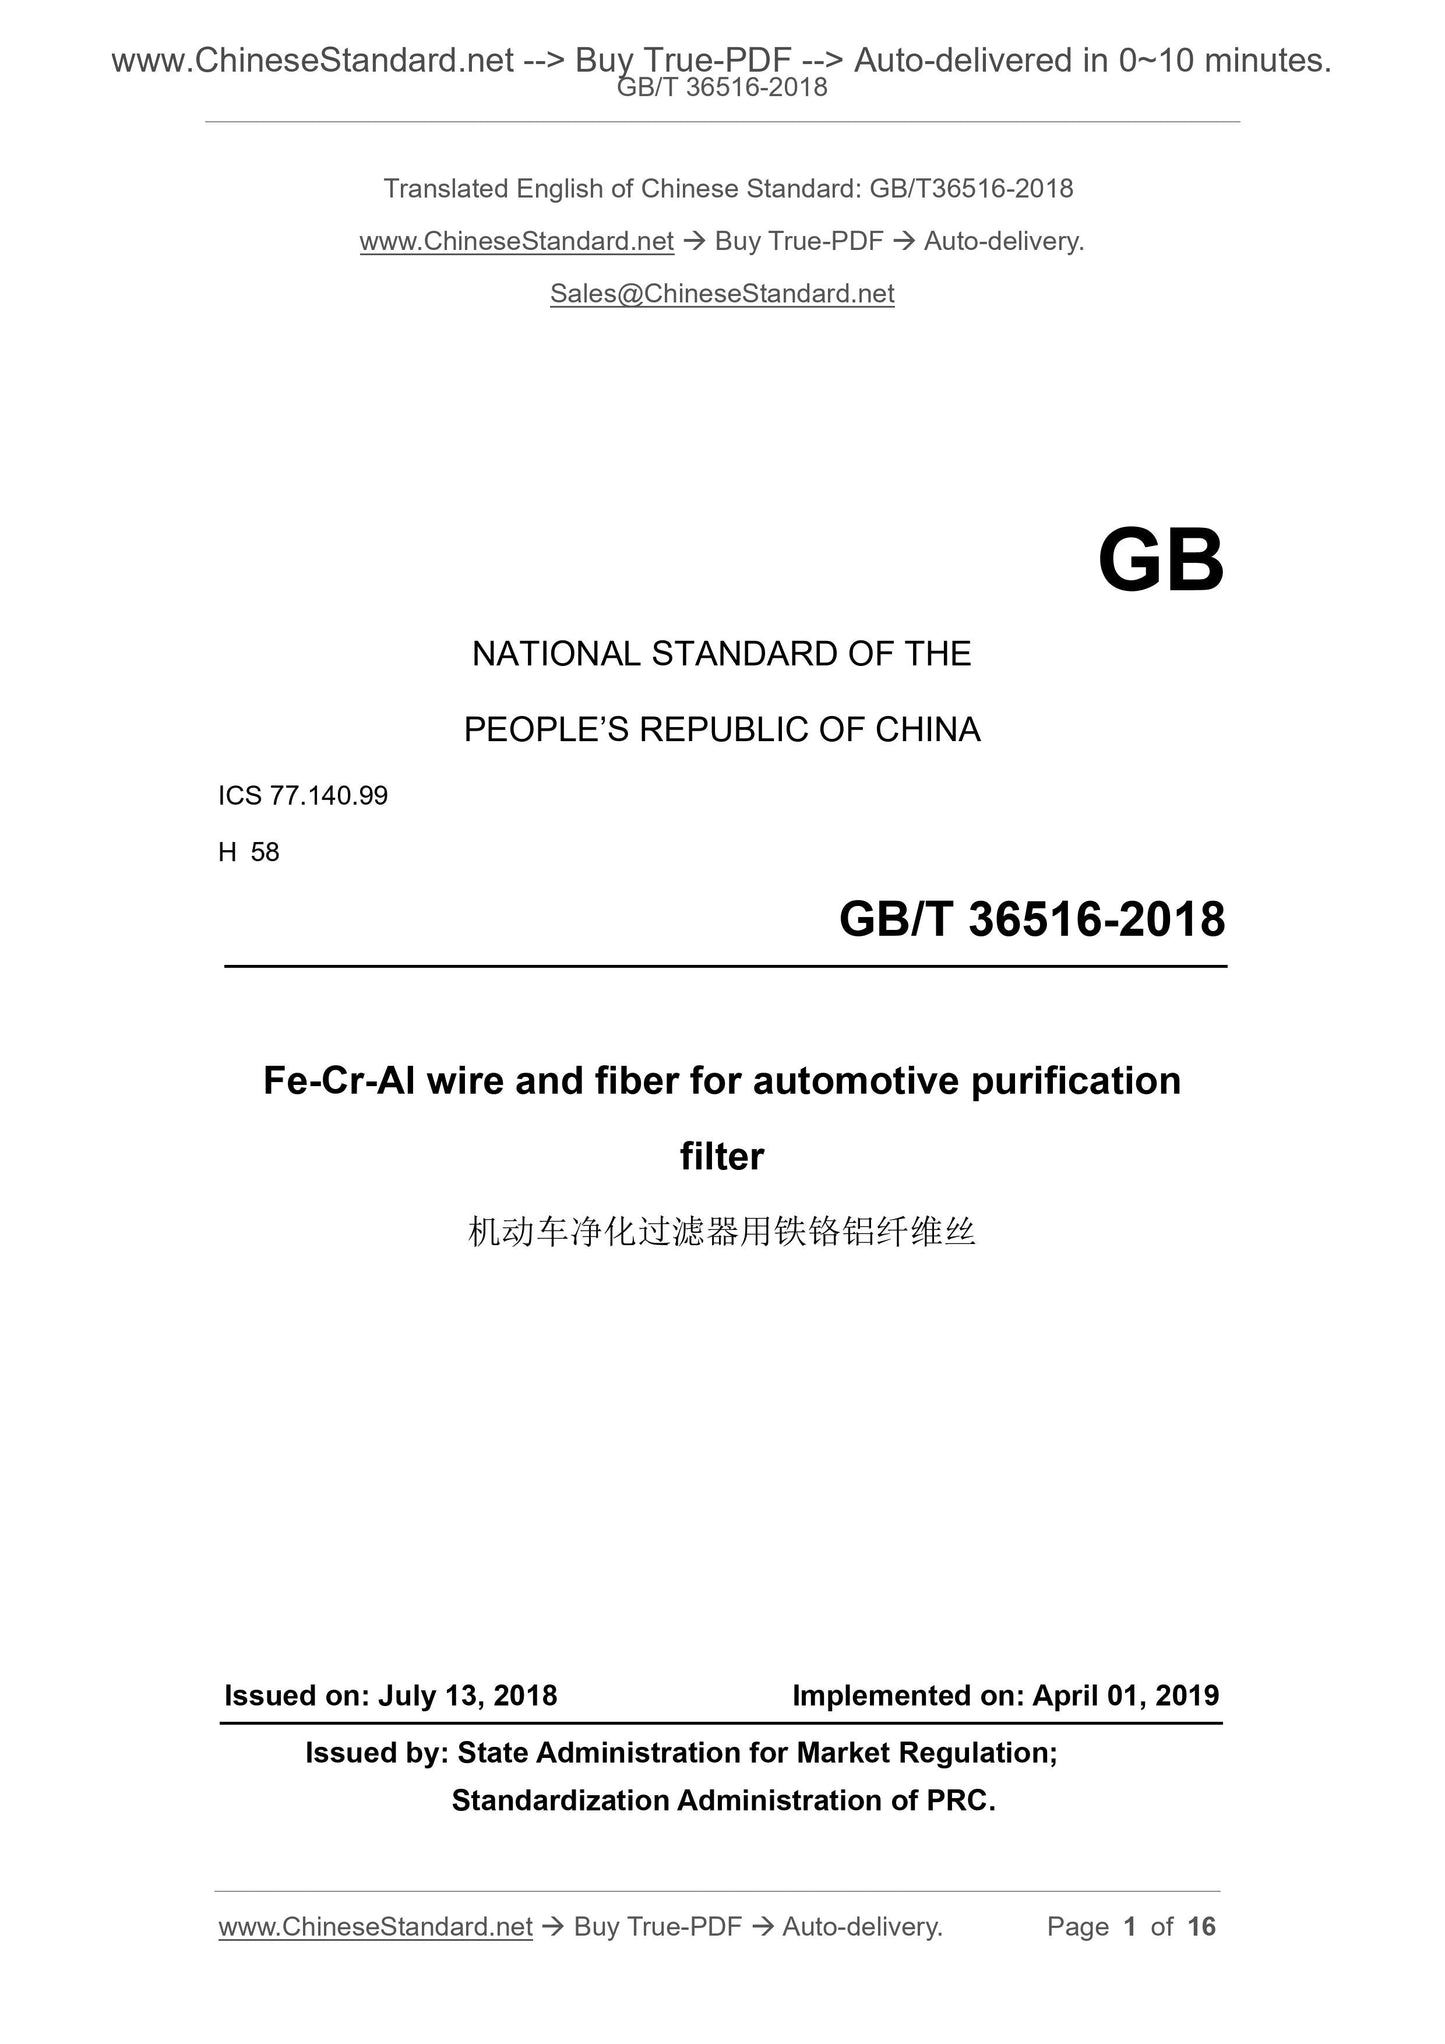 GB/T 36516-2018 Page 1